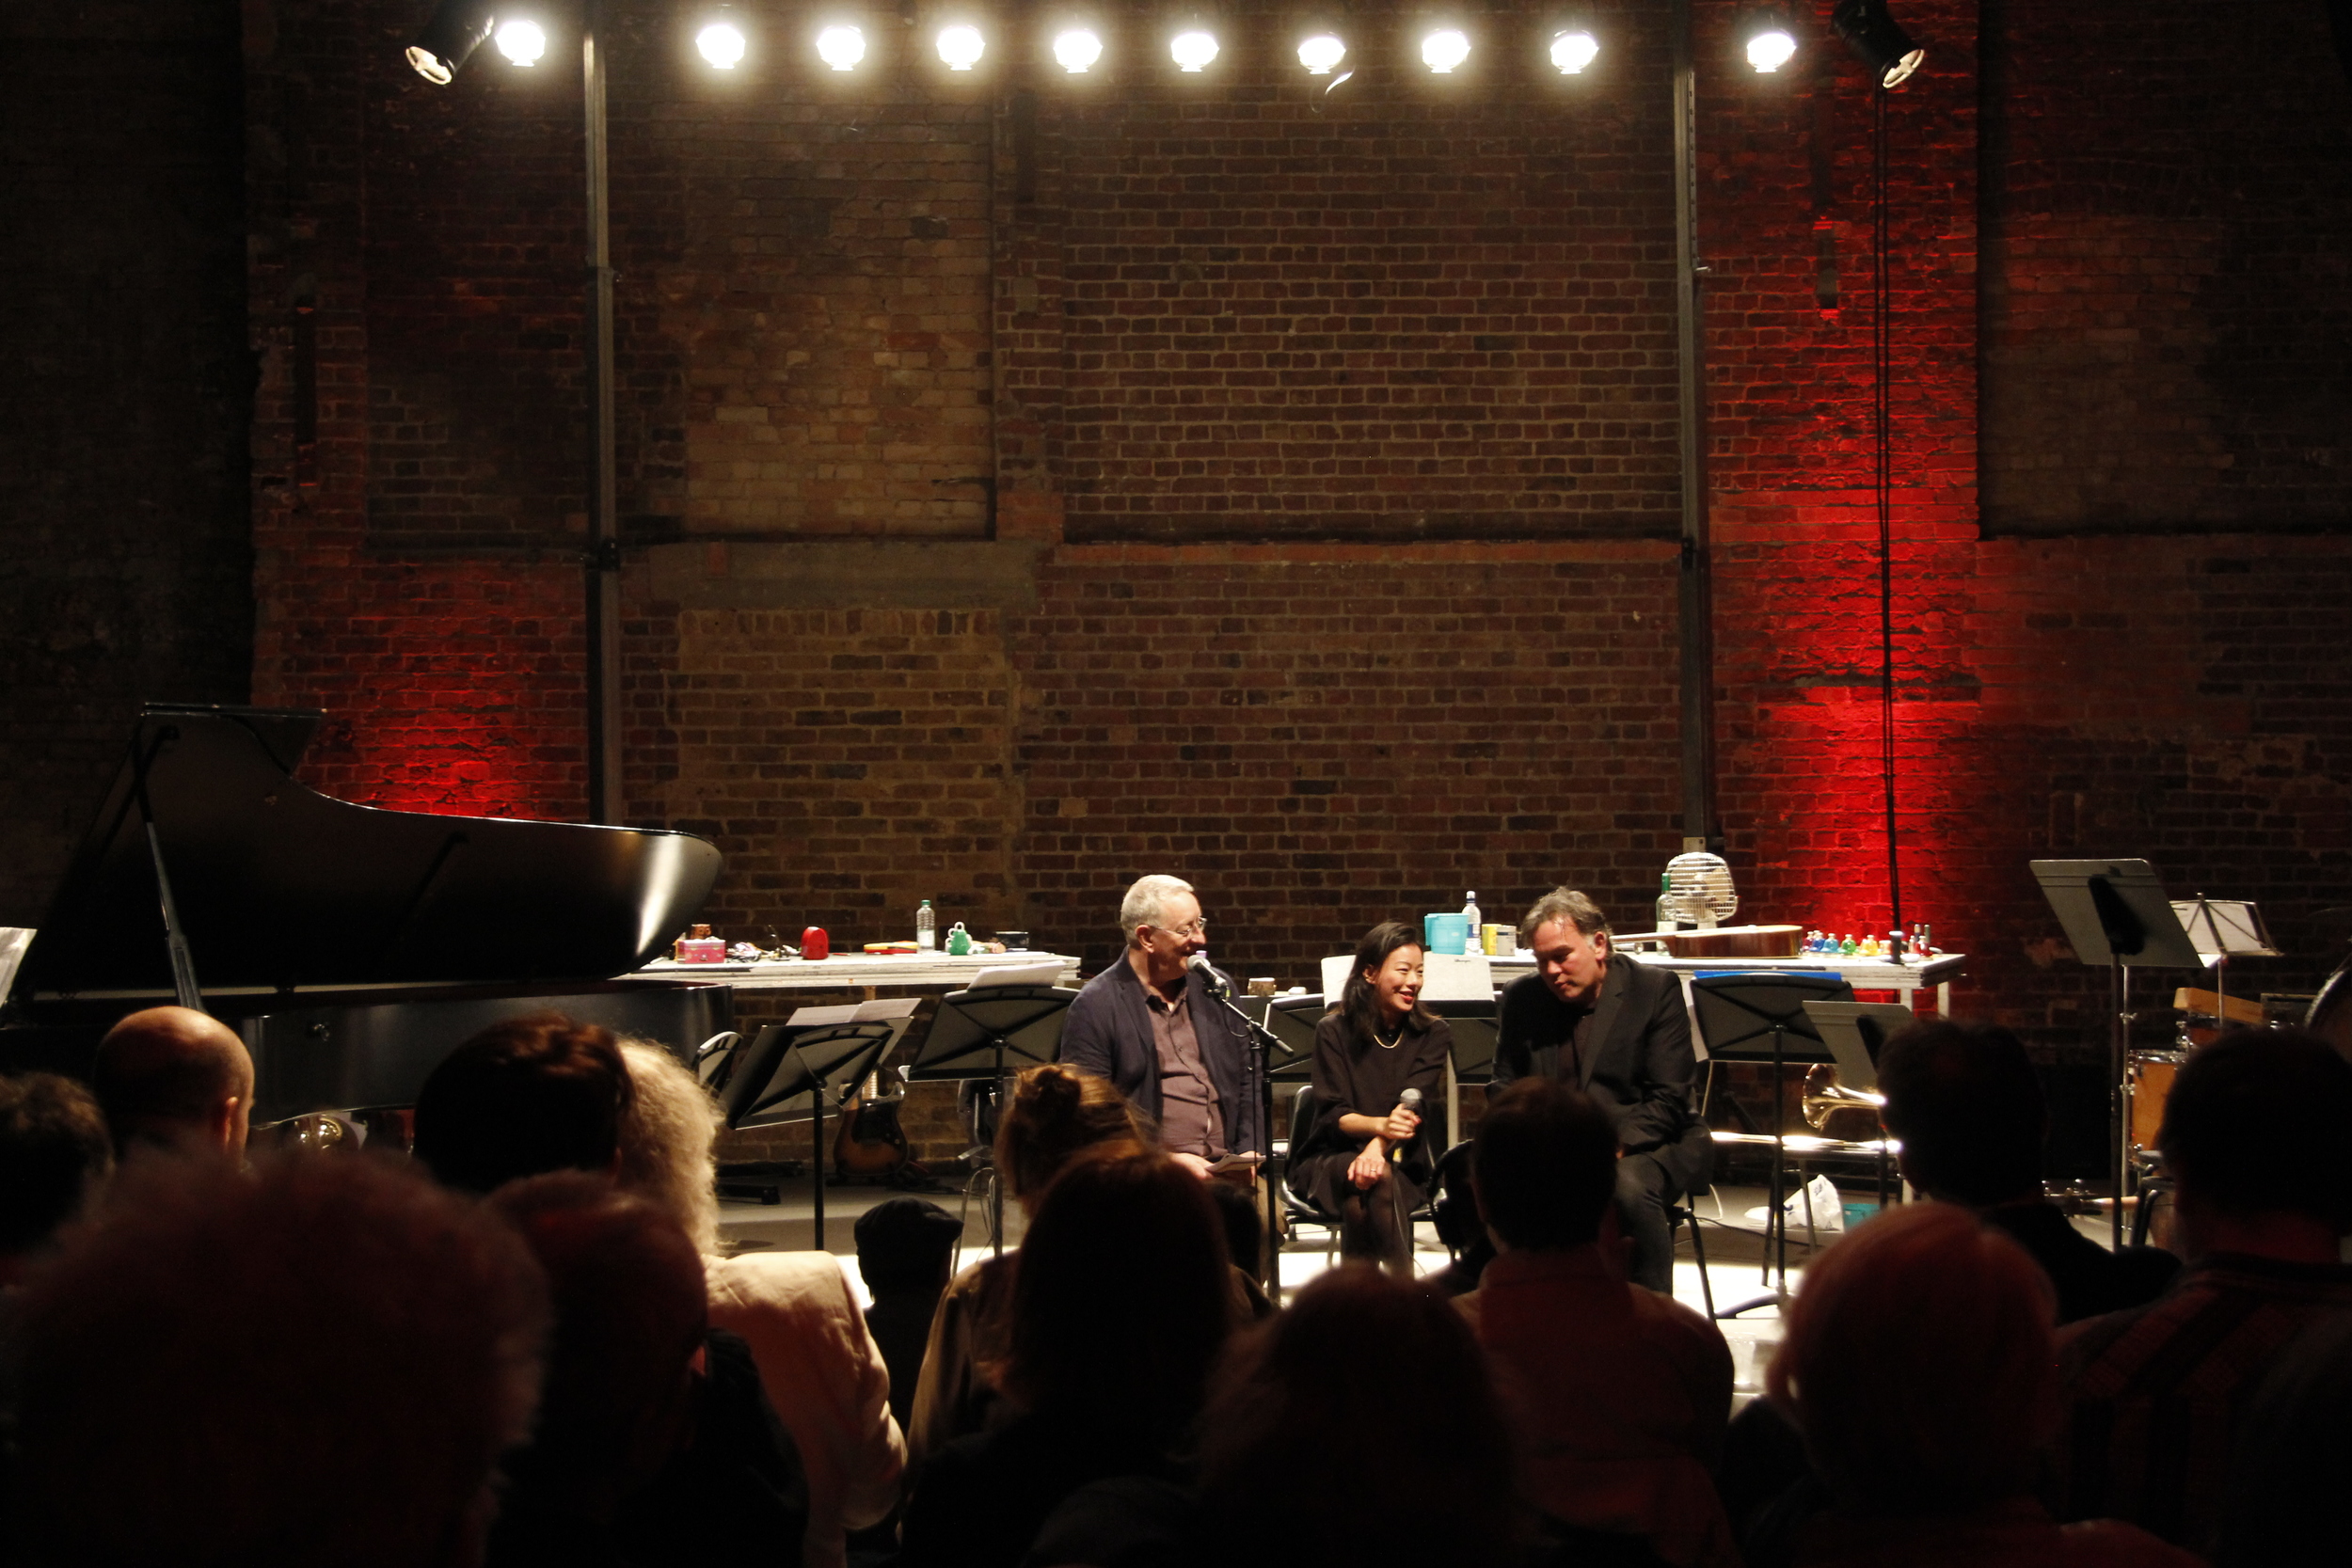 Discussing Familiar/Unfamiliar concert with Steve Beresford and Stewart Lee at the Spitalfields Festival, 2014